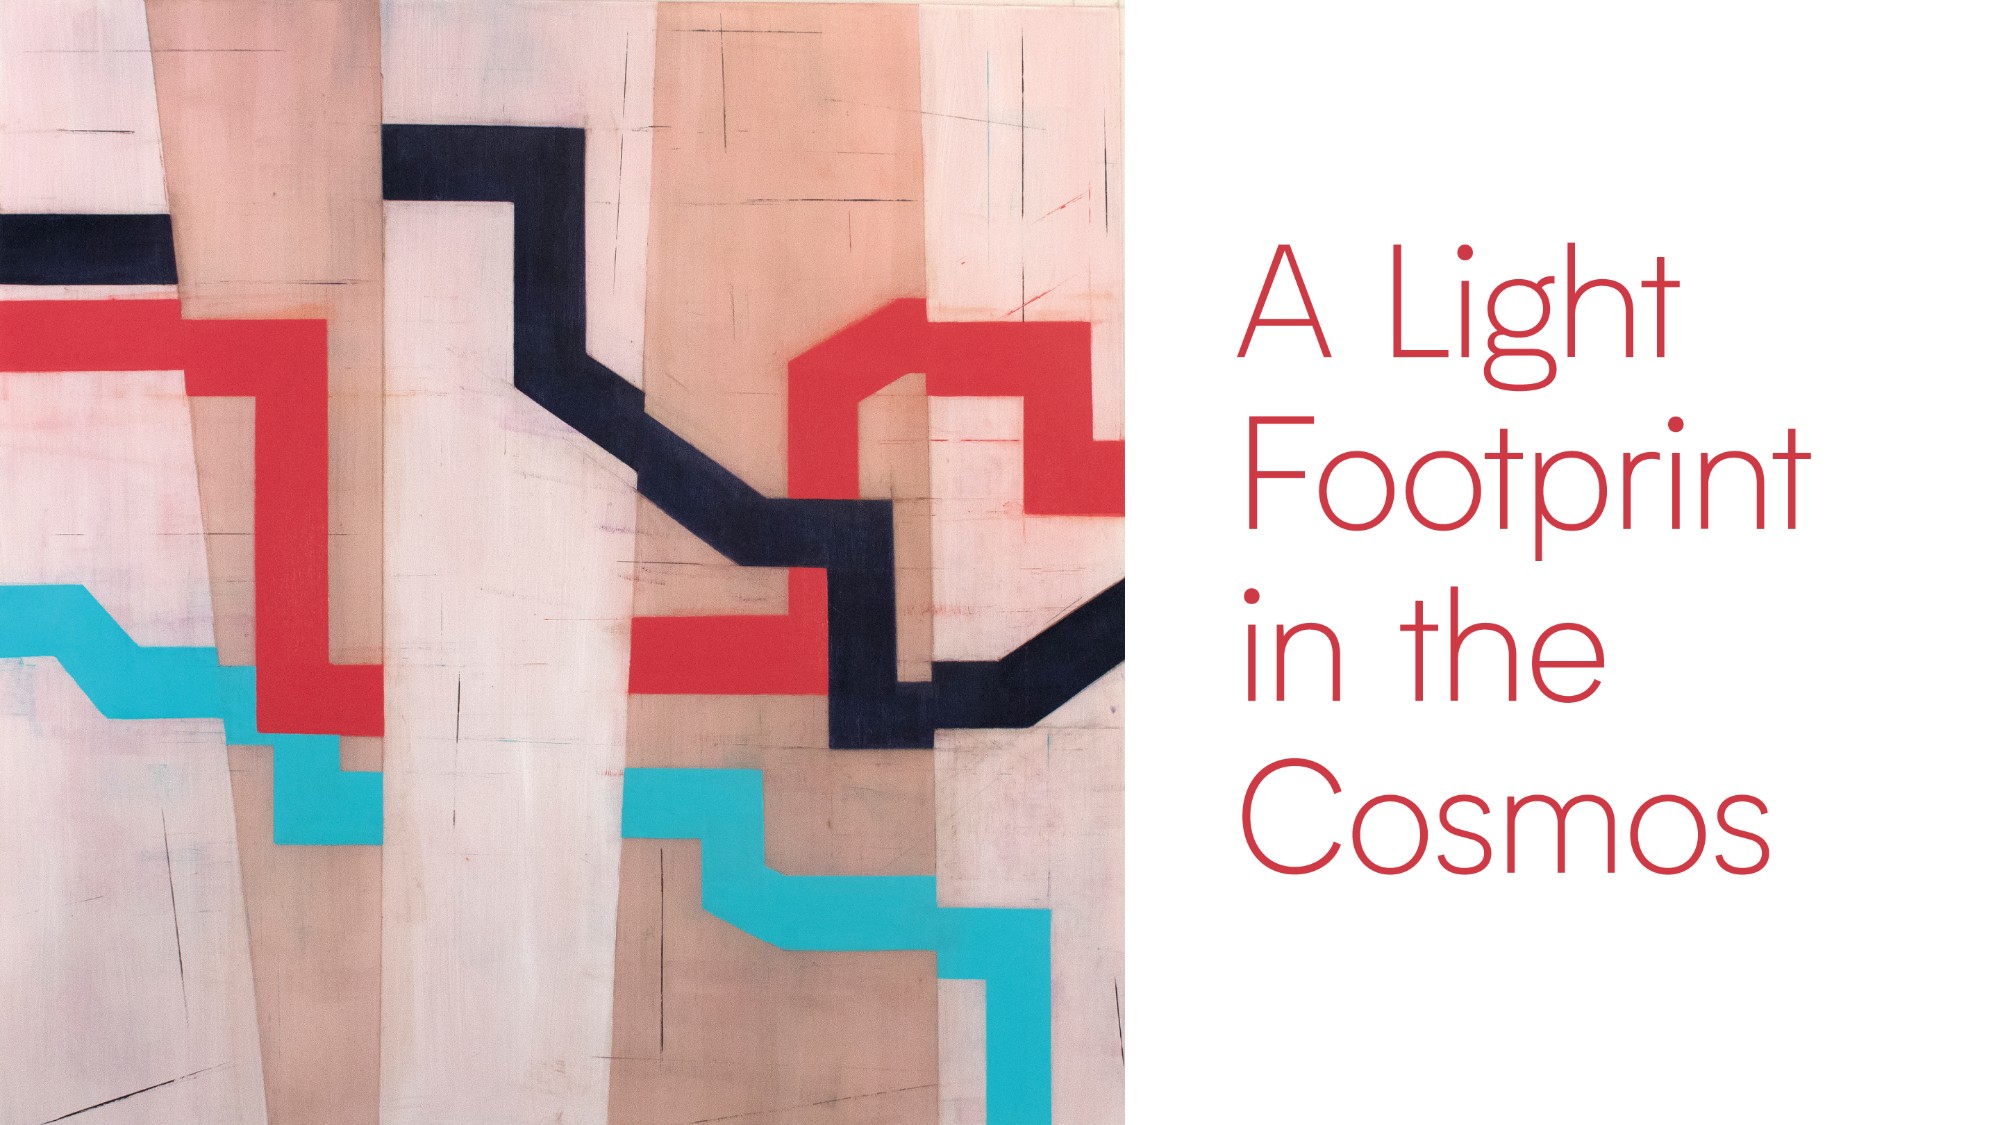 A Light Footprint in the Cosmos - School for the Contemporary Arts